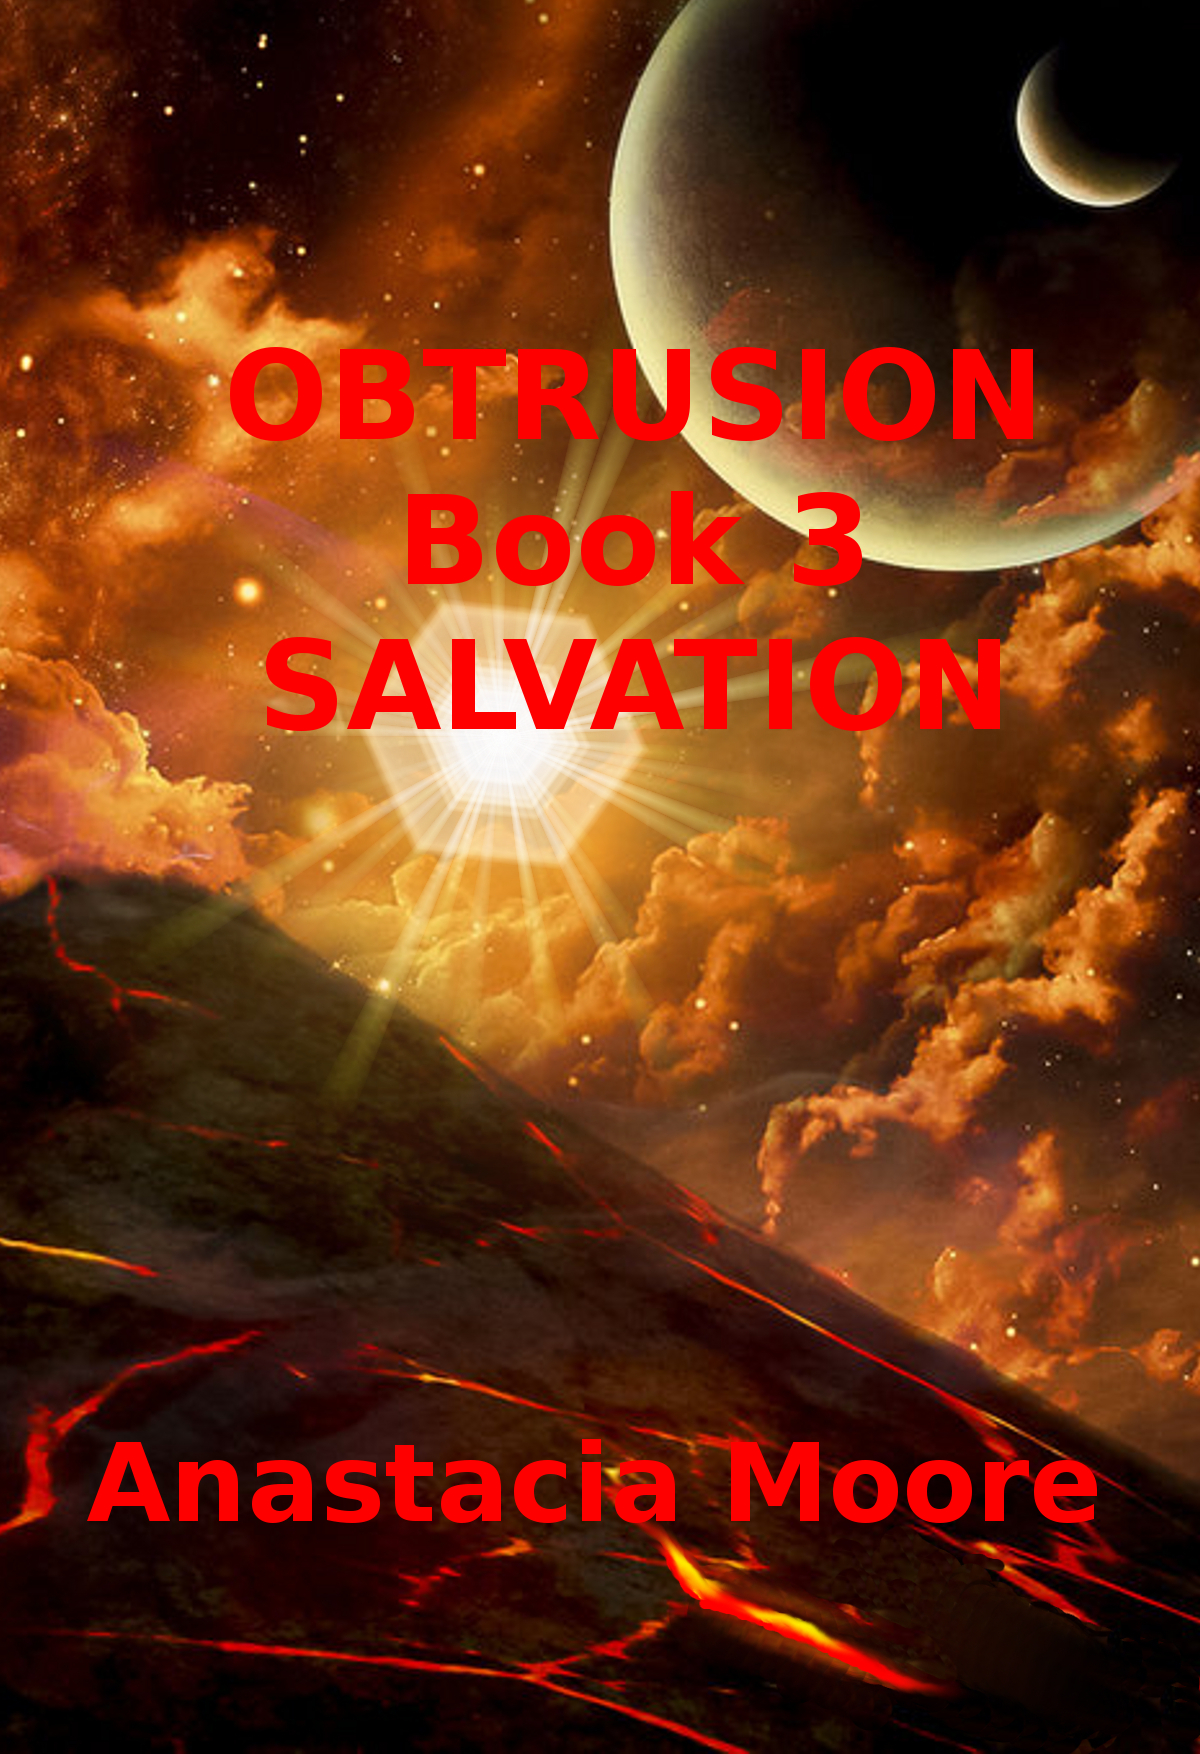 The final chapter in the Obtrusion trilogy. Who is worthy of salvation? Will the attempt at salvation be thwarted by greedy and self-serving government idealists? Is this really the end or a new beginning?